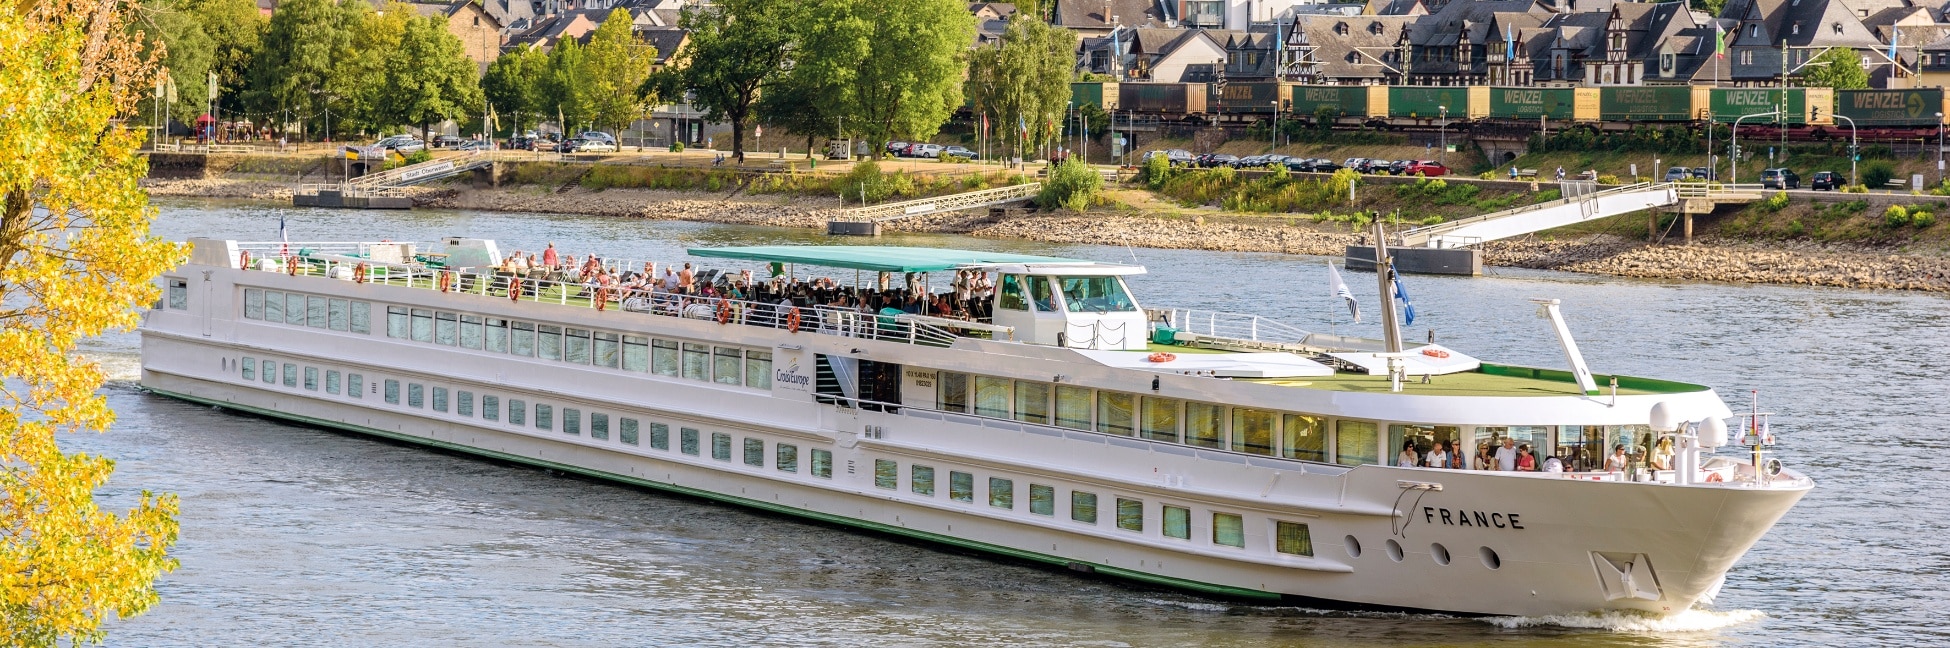 Bookings Open For Croisieurope’s 2023 French Hotel Barge Itineraries